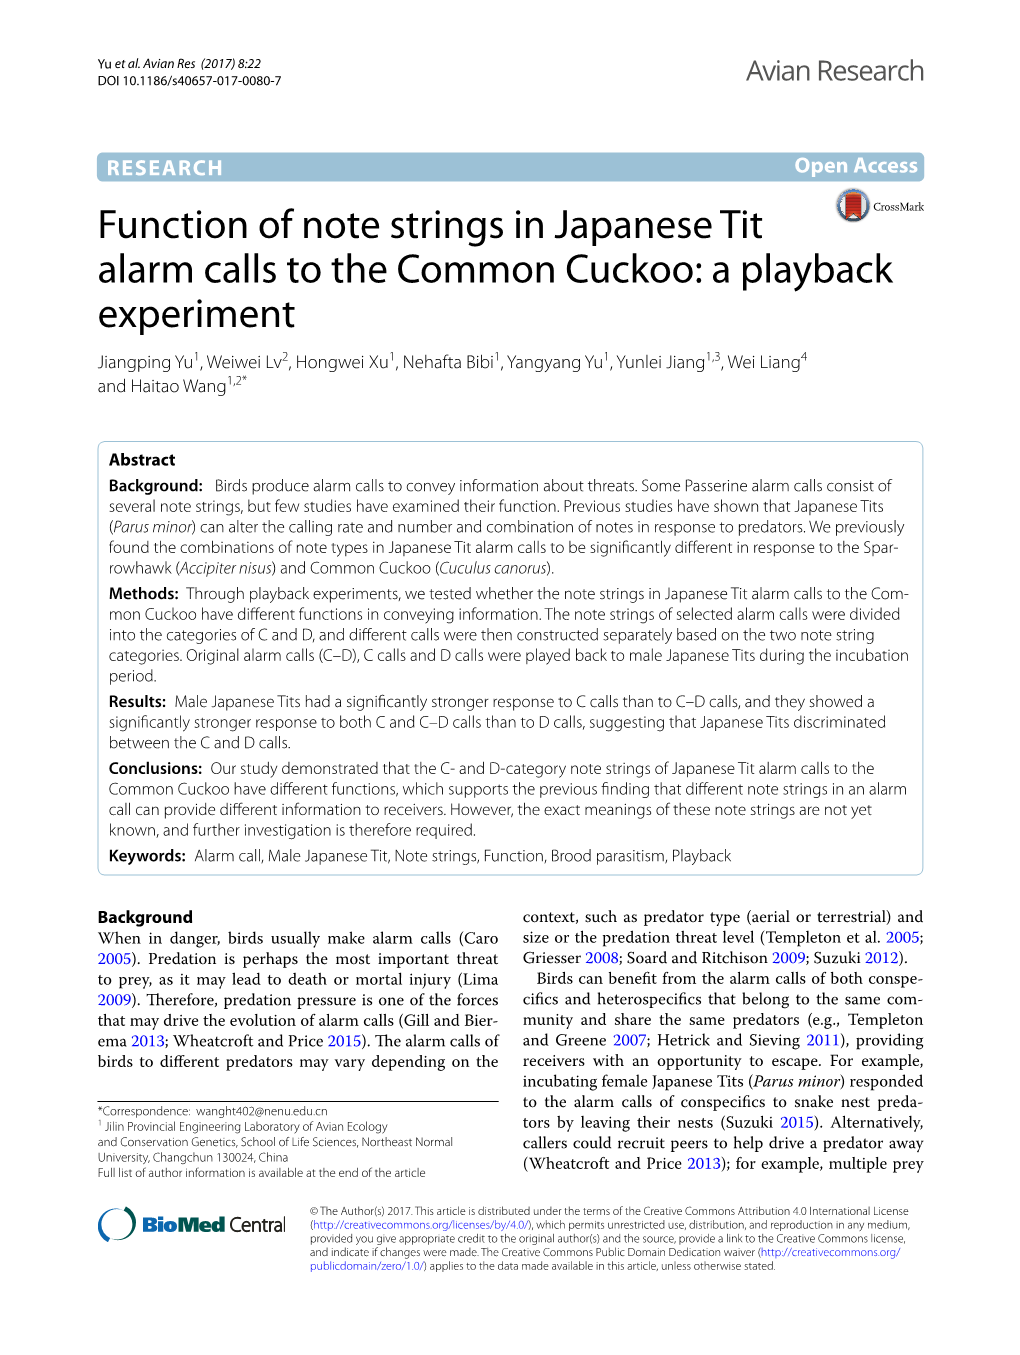 Function of Note Strings in Japanese Tit Alarm Calls to the Common Cuckoo